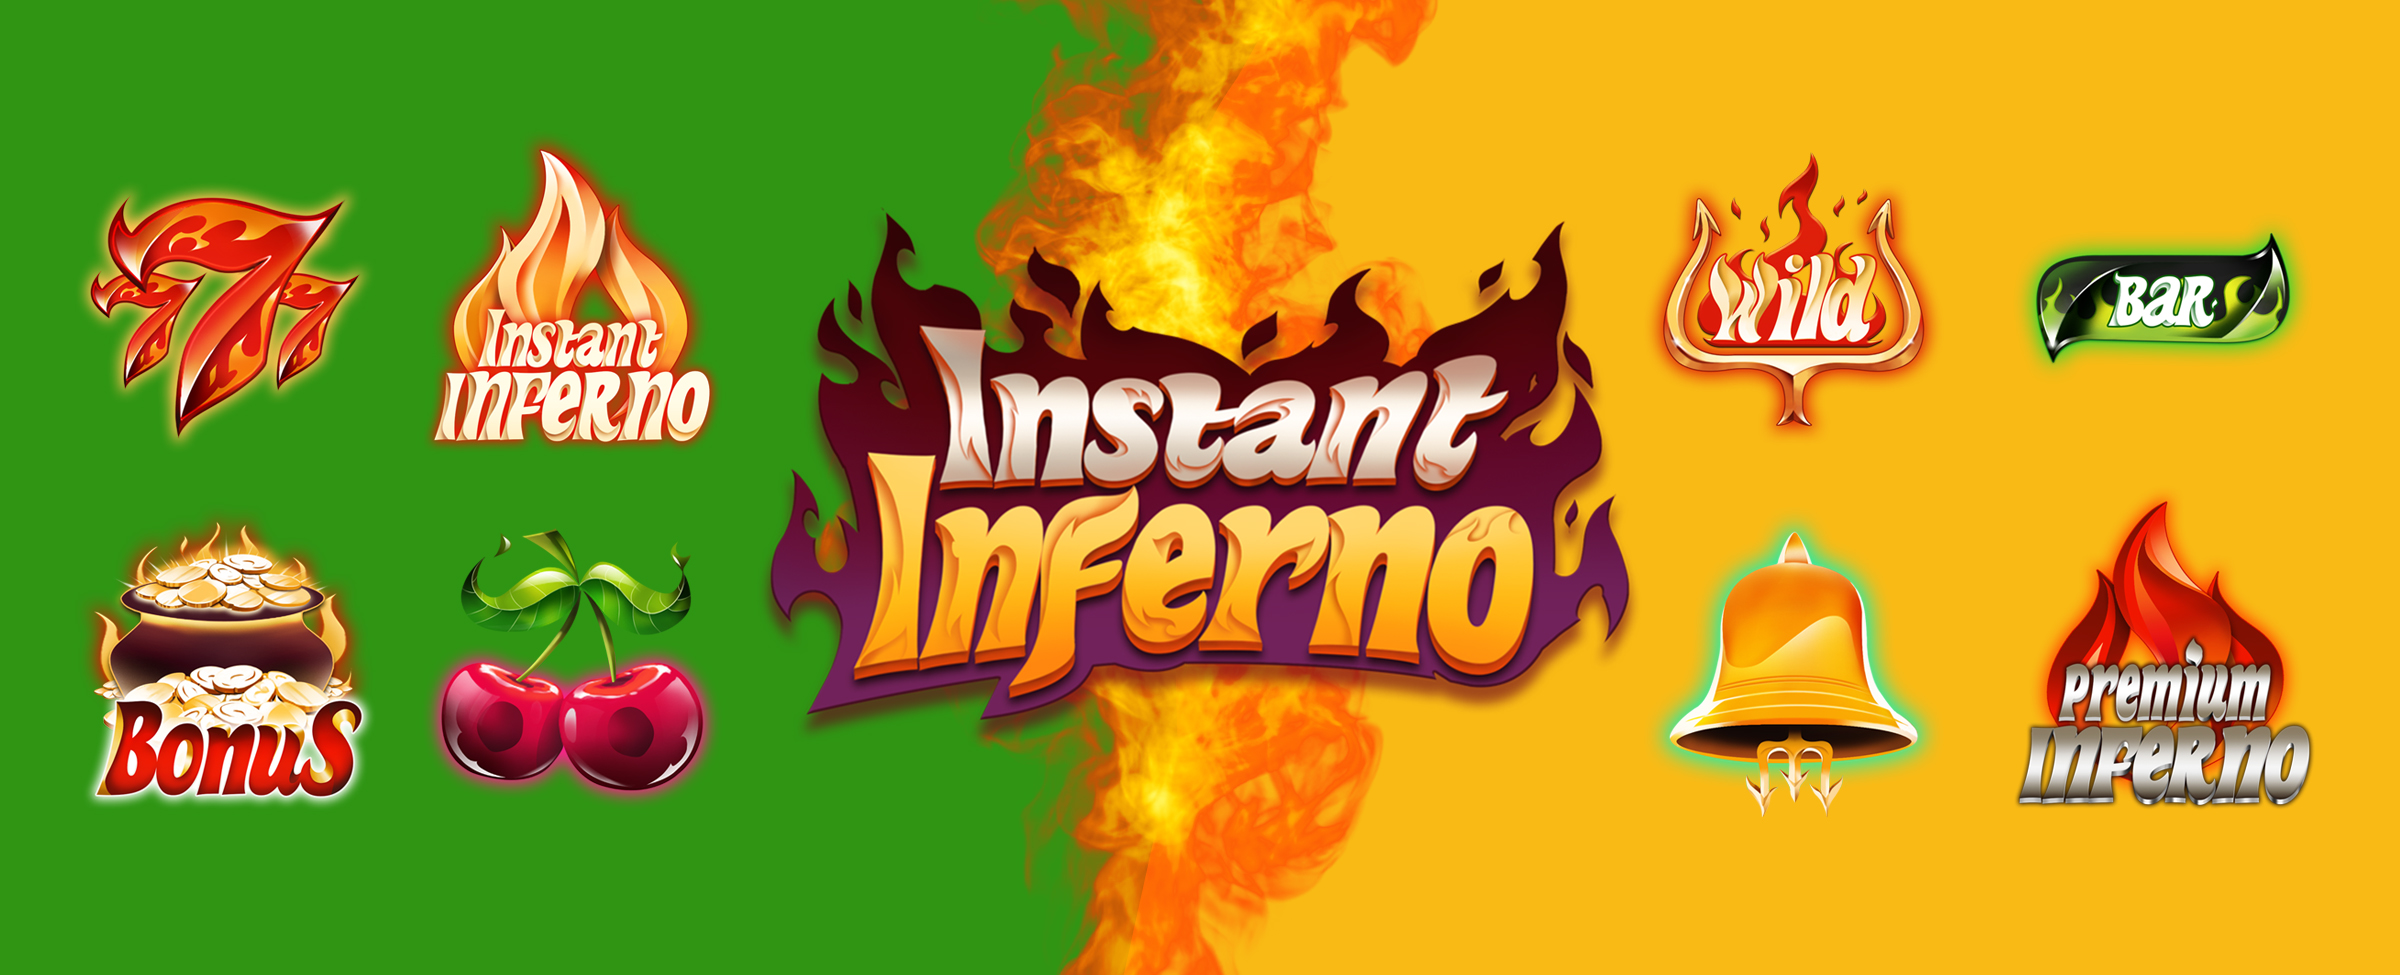 Let’s bust down the doors and look at the top features of Instant Inferno.